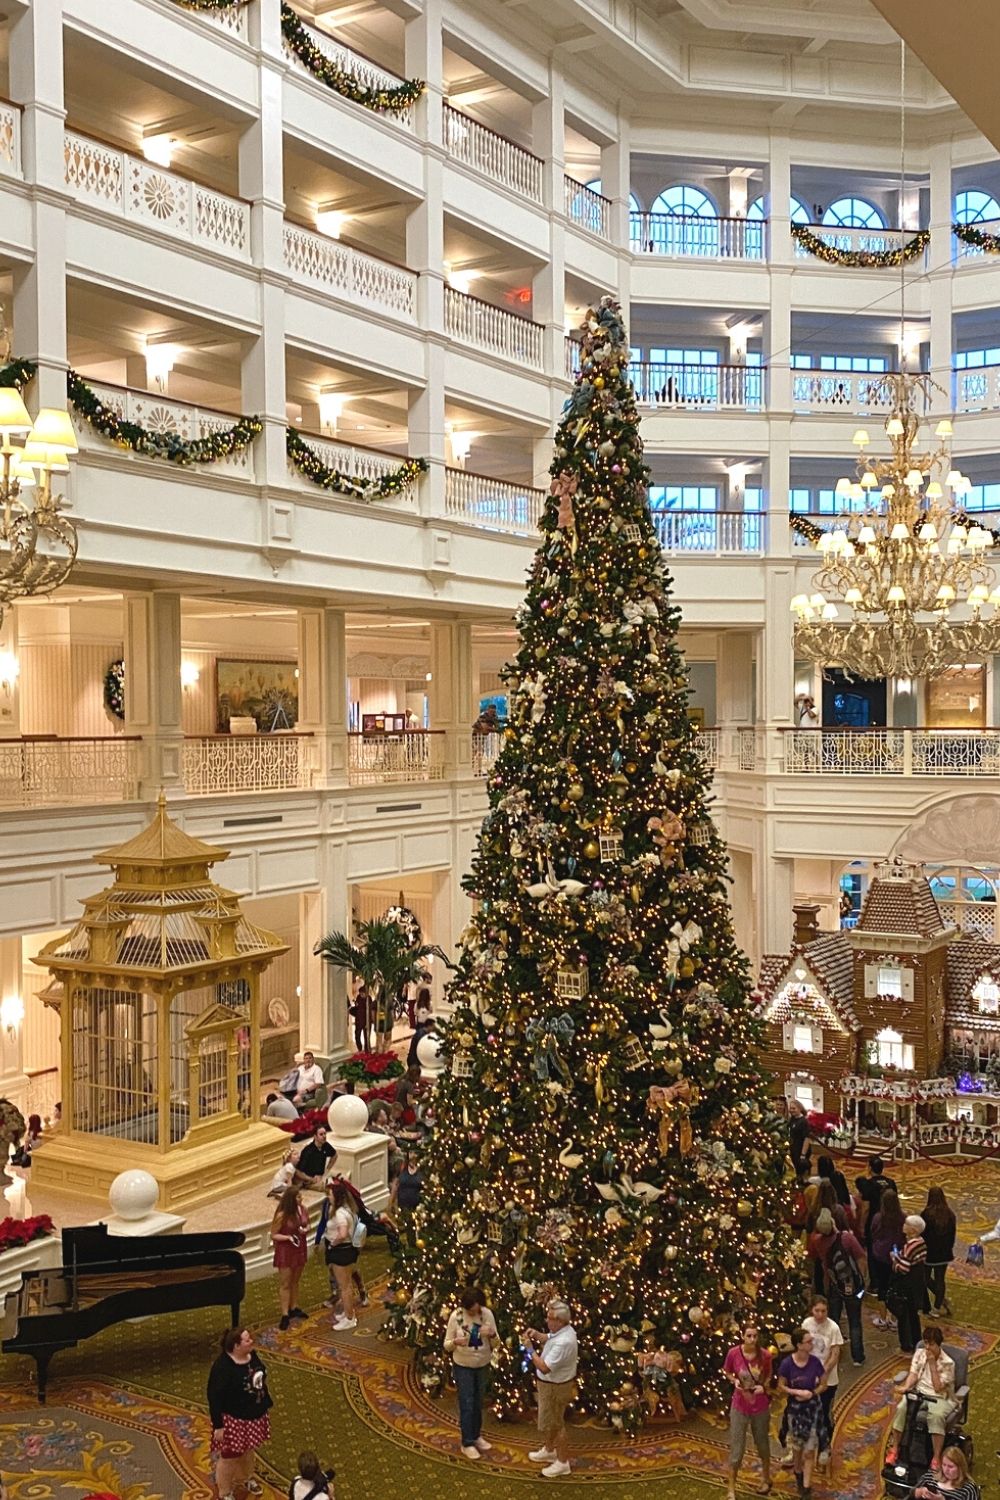 interior of the Grand Floridian Resort at Christmas time